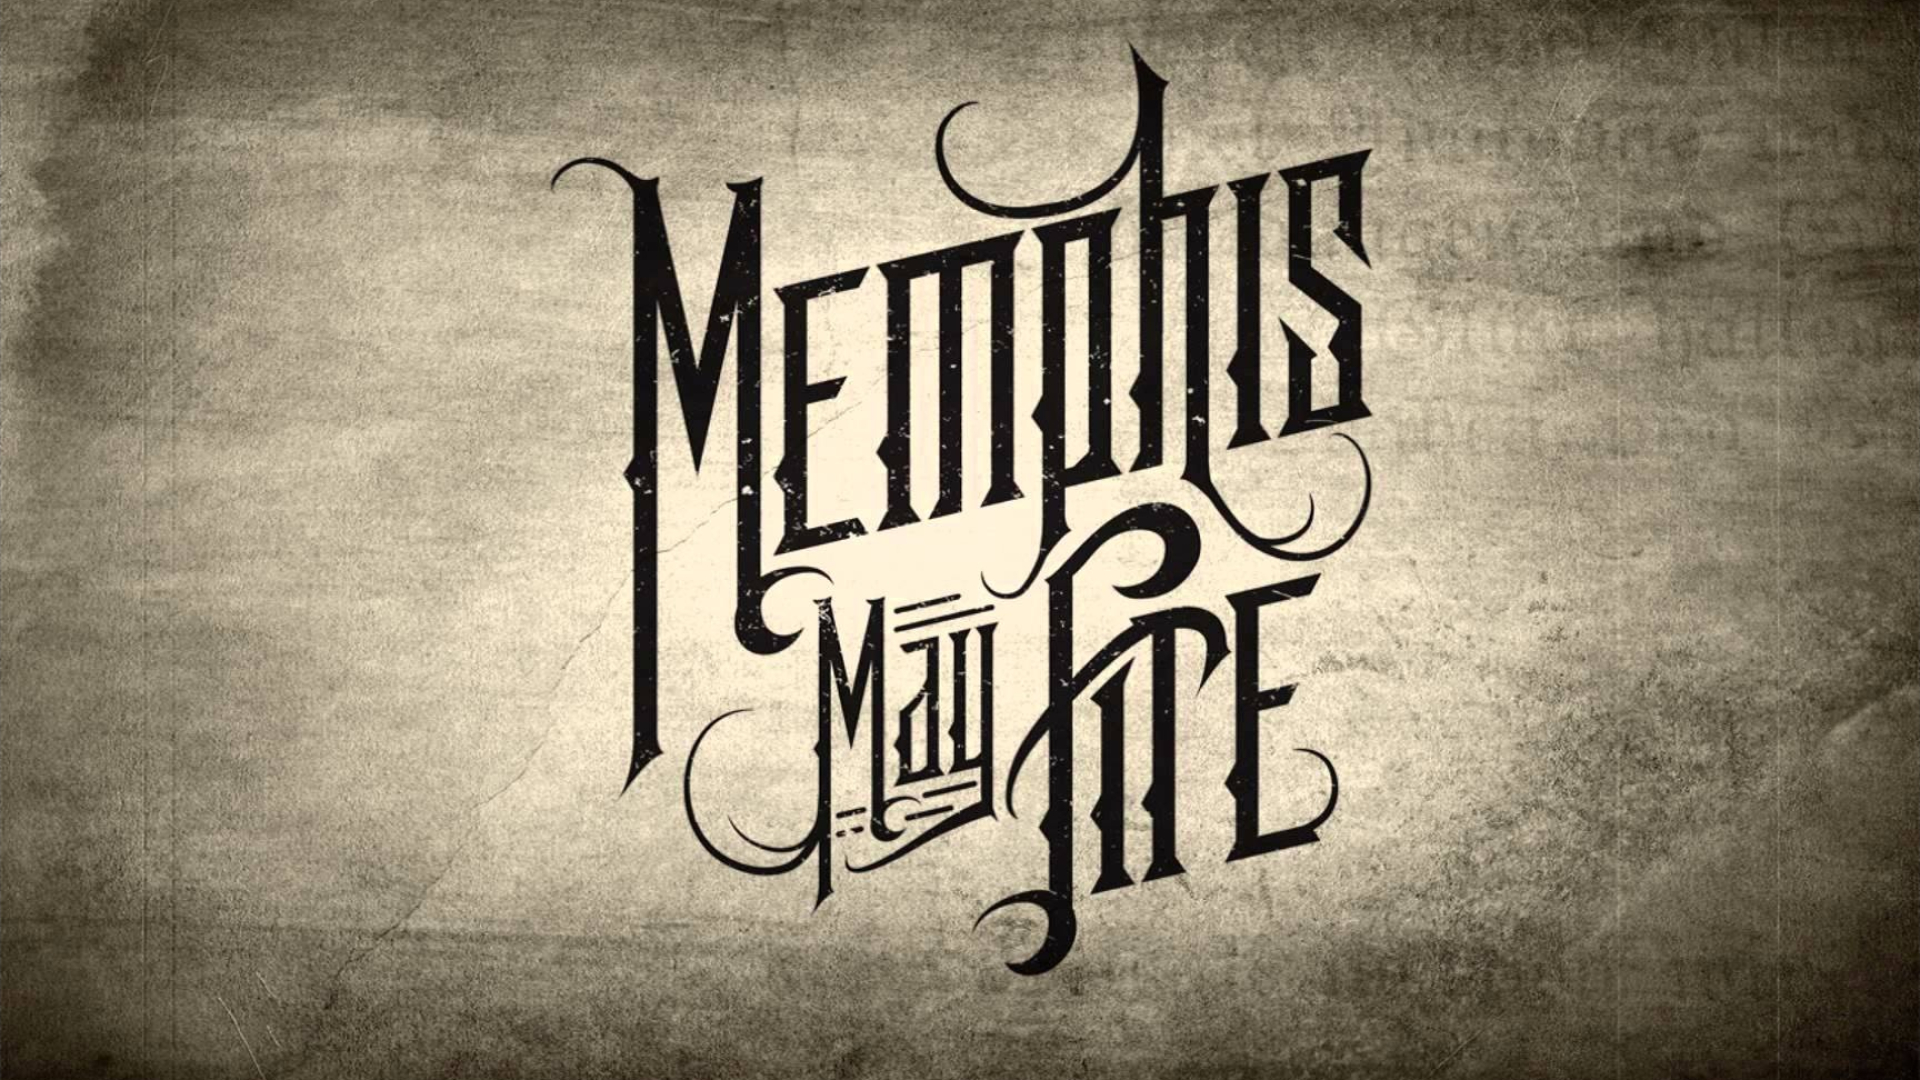 Memphis May Fire (Music), iPhone wallpapers, Band visuals, Mobile backgrounds, 1920x1080 Full HD Desktop